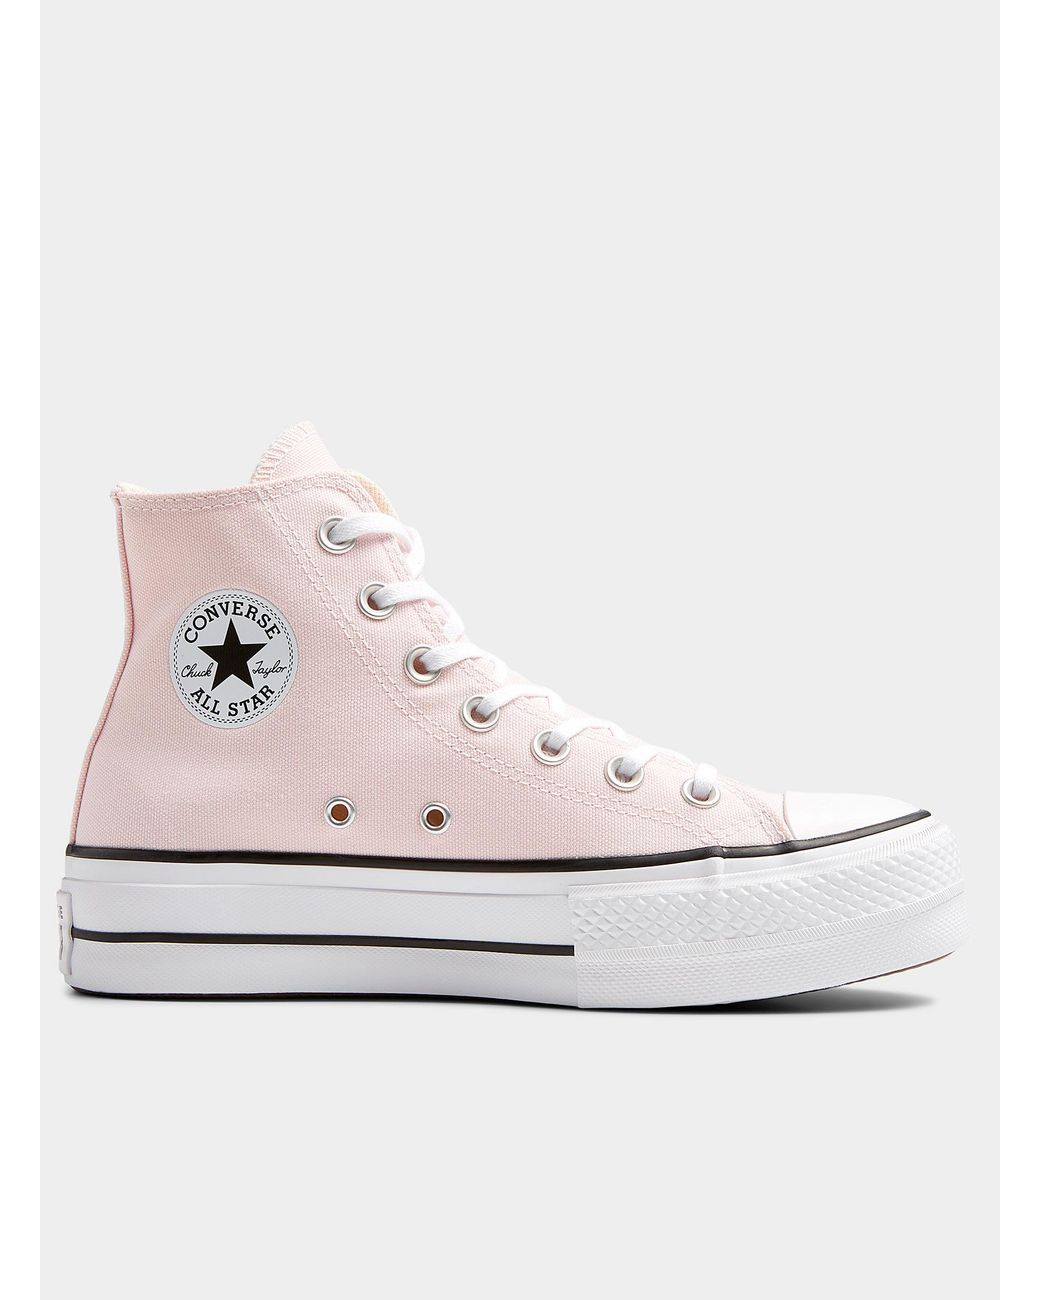 Converse Chuck Taylor All Star Lift High Top Powder Pink Platform Sneakers in Natural |